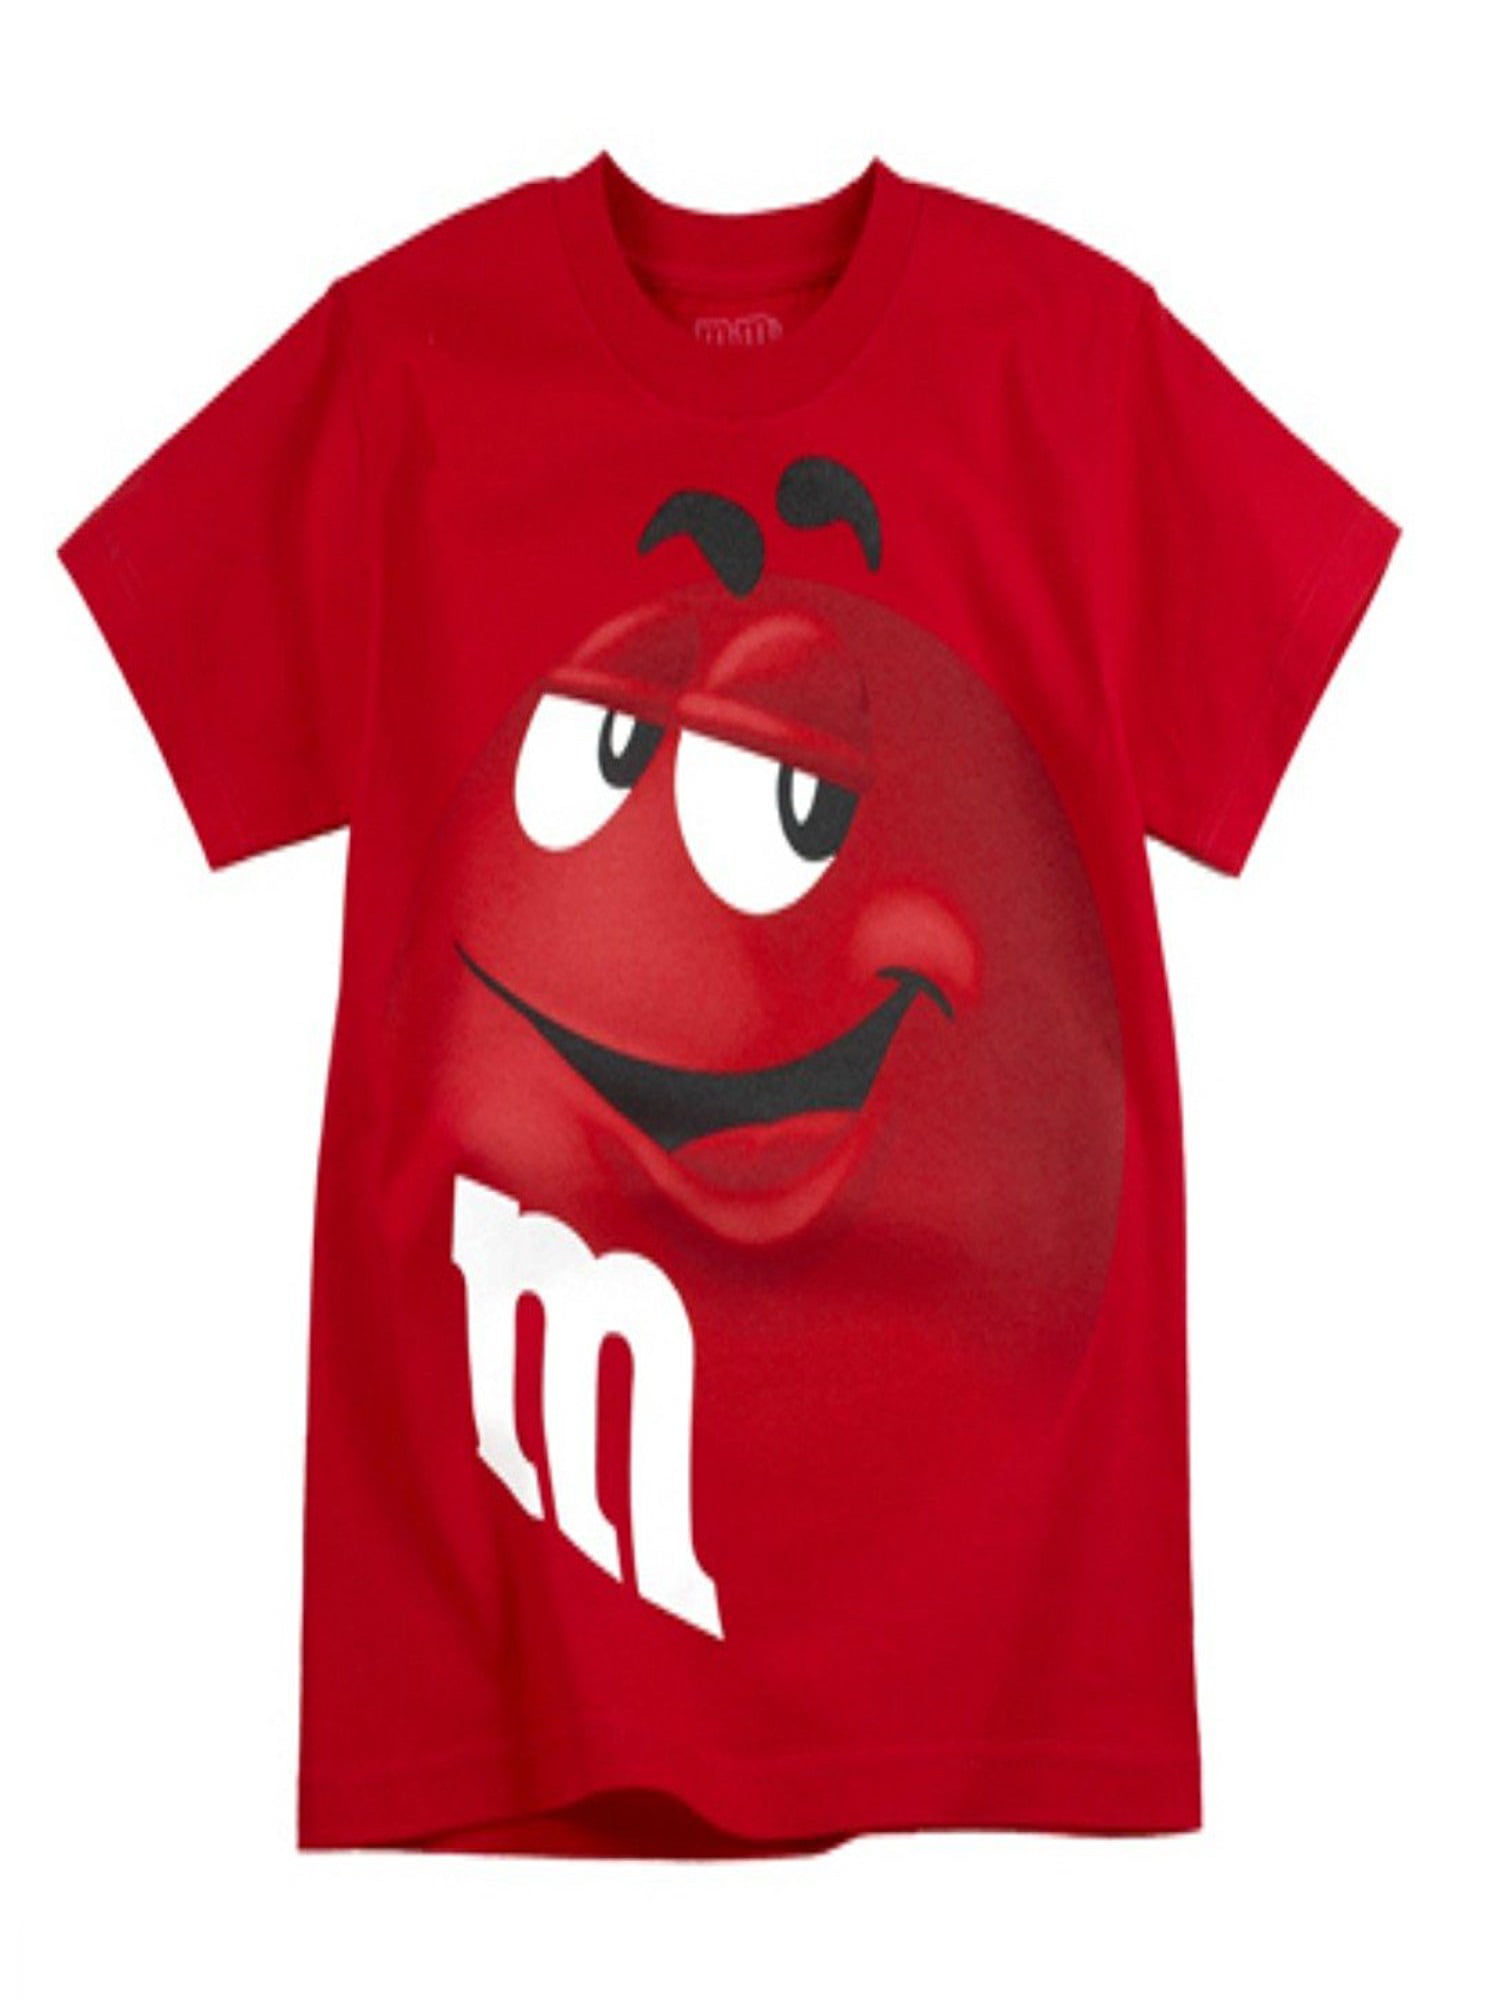 red m&m t shirt